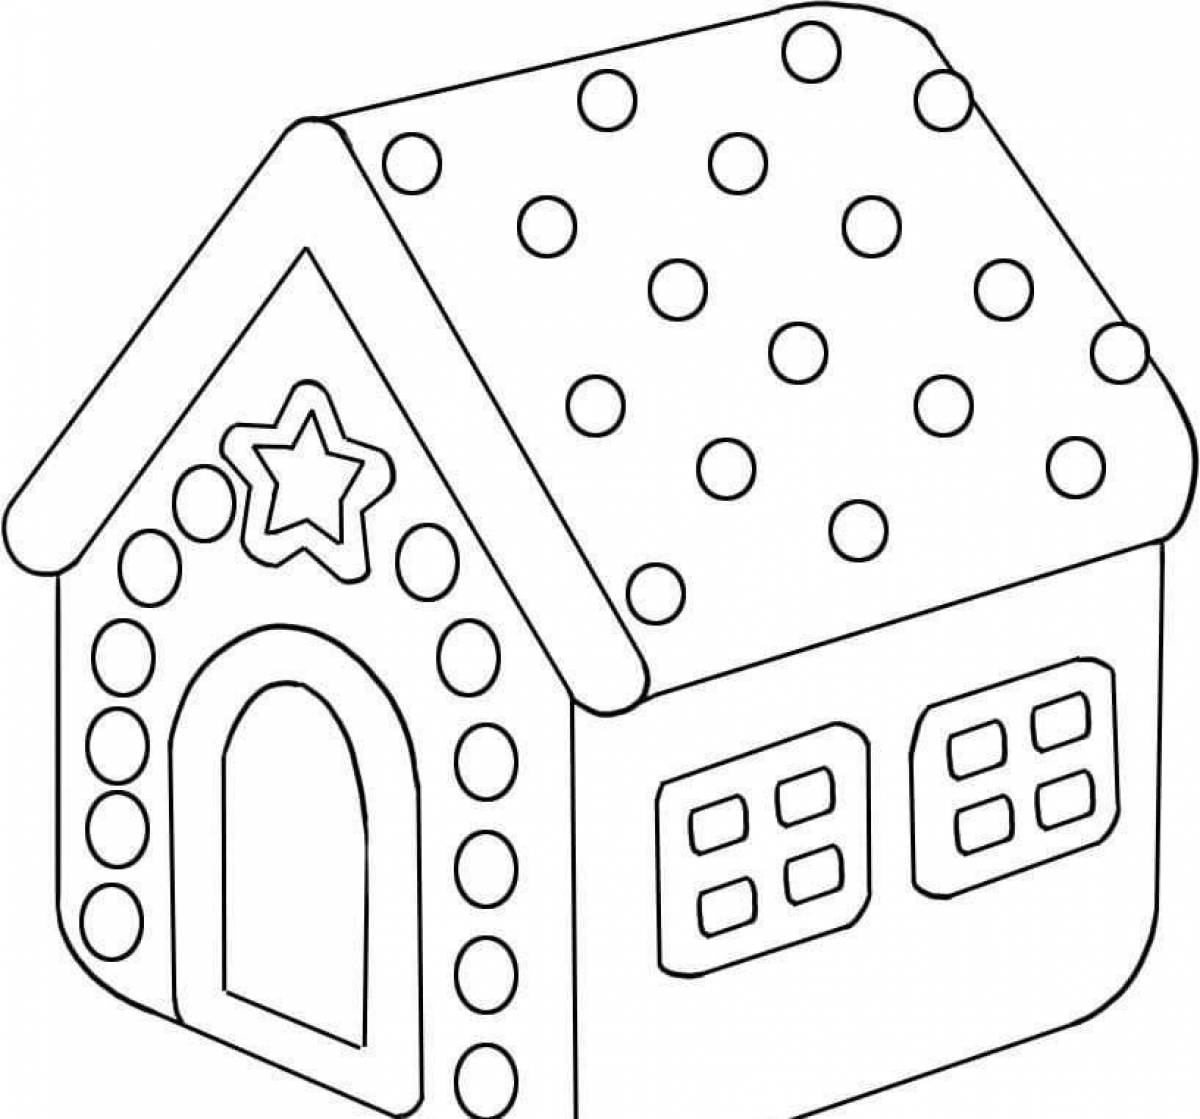 Gorgeous gingerbread house coloring page